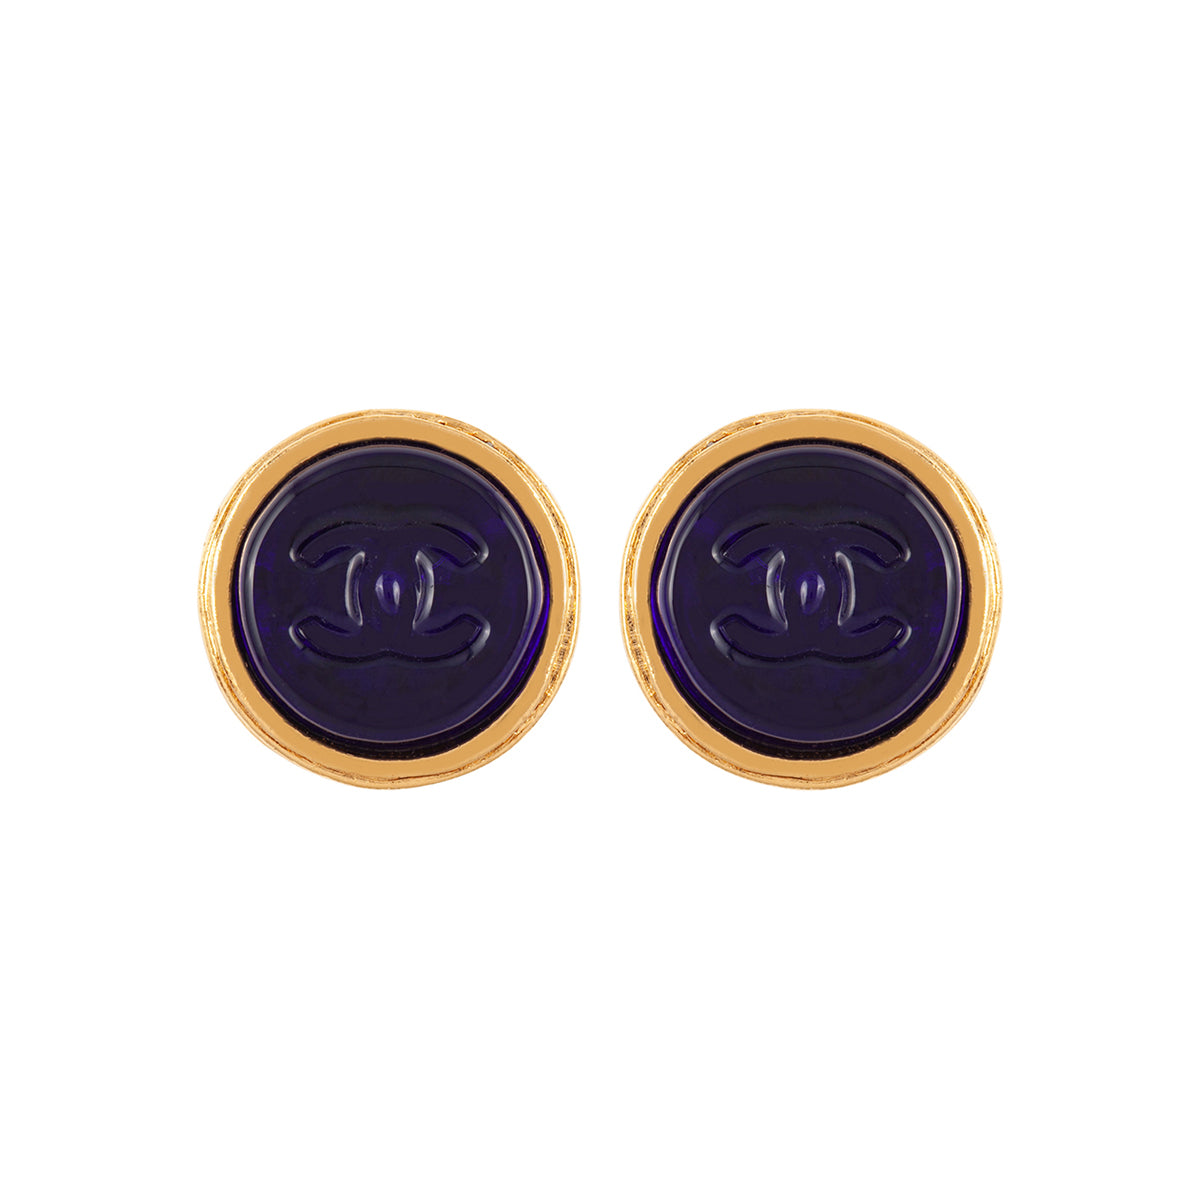 1993 Vintage Rare Chanel Blue Gripoix Clip-On Earrings